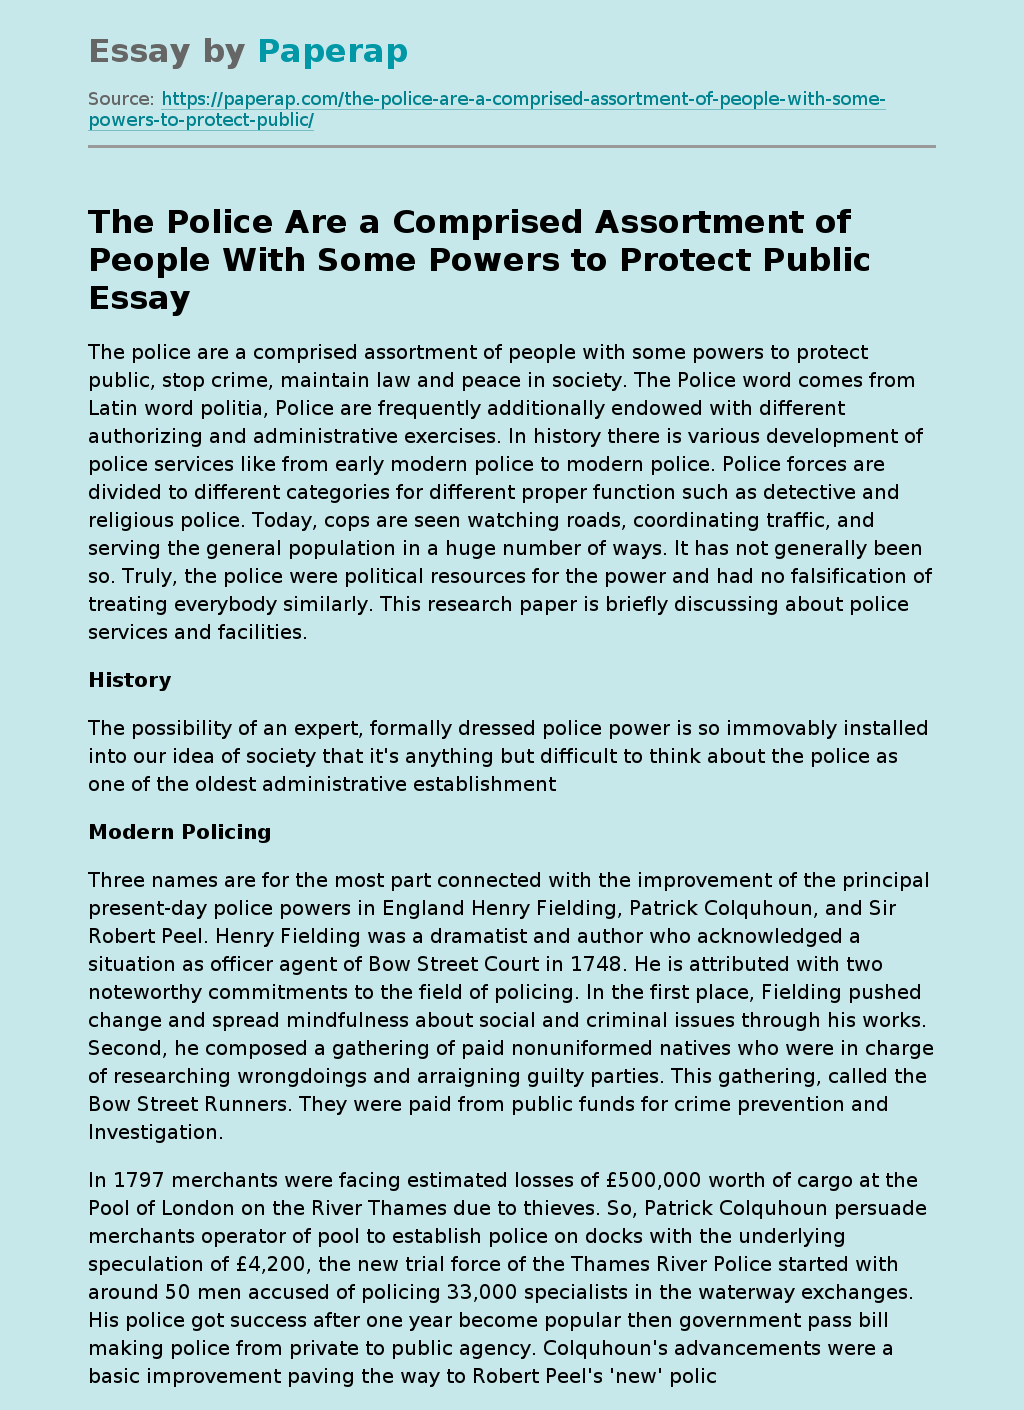 The Police Are a Comprised Assortment of People With Some Powers to Protect Public